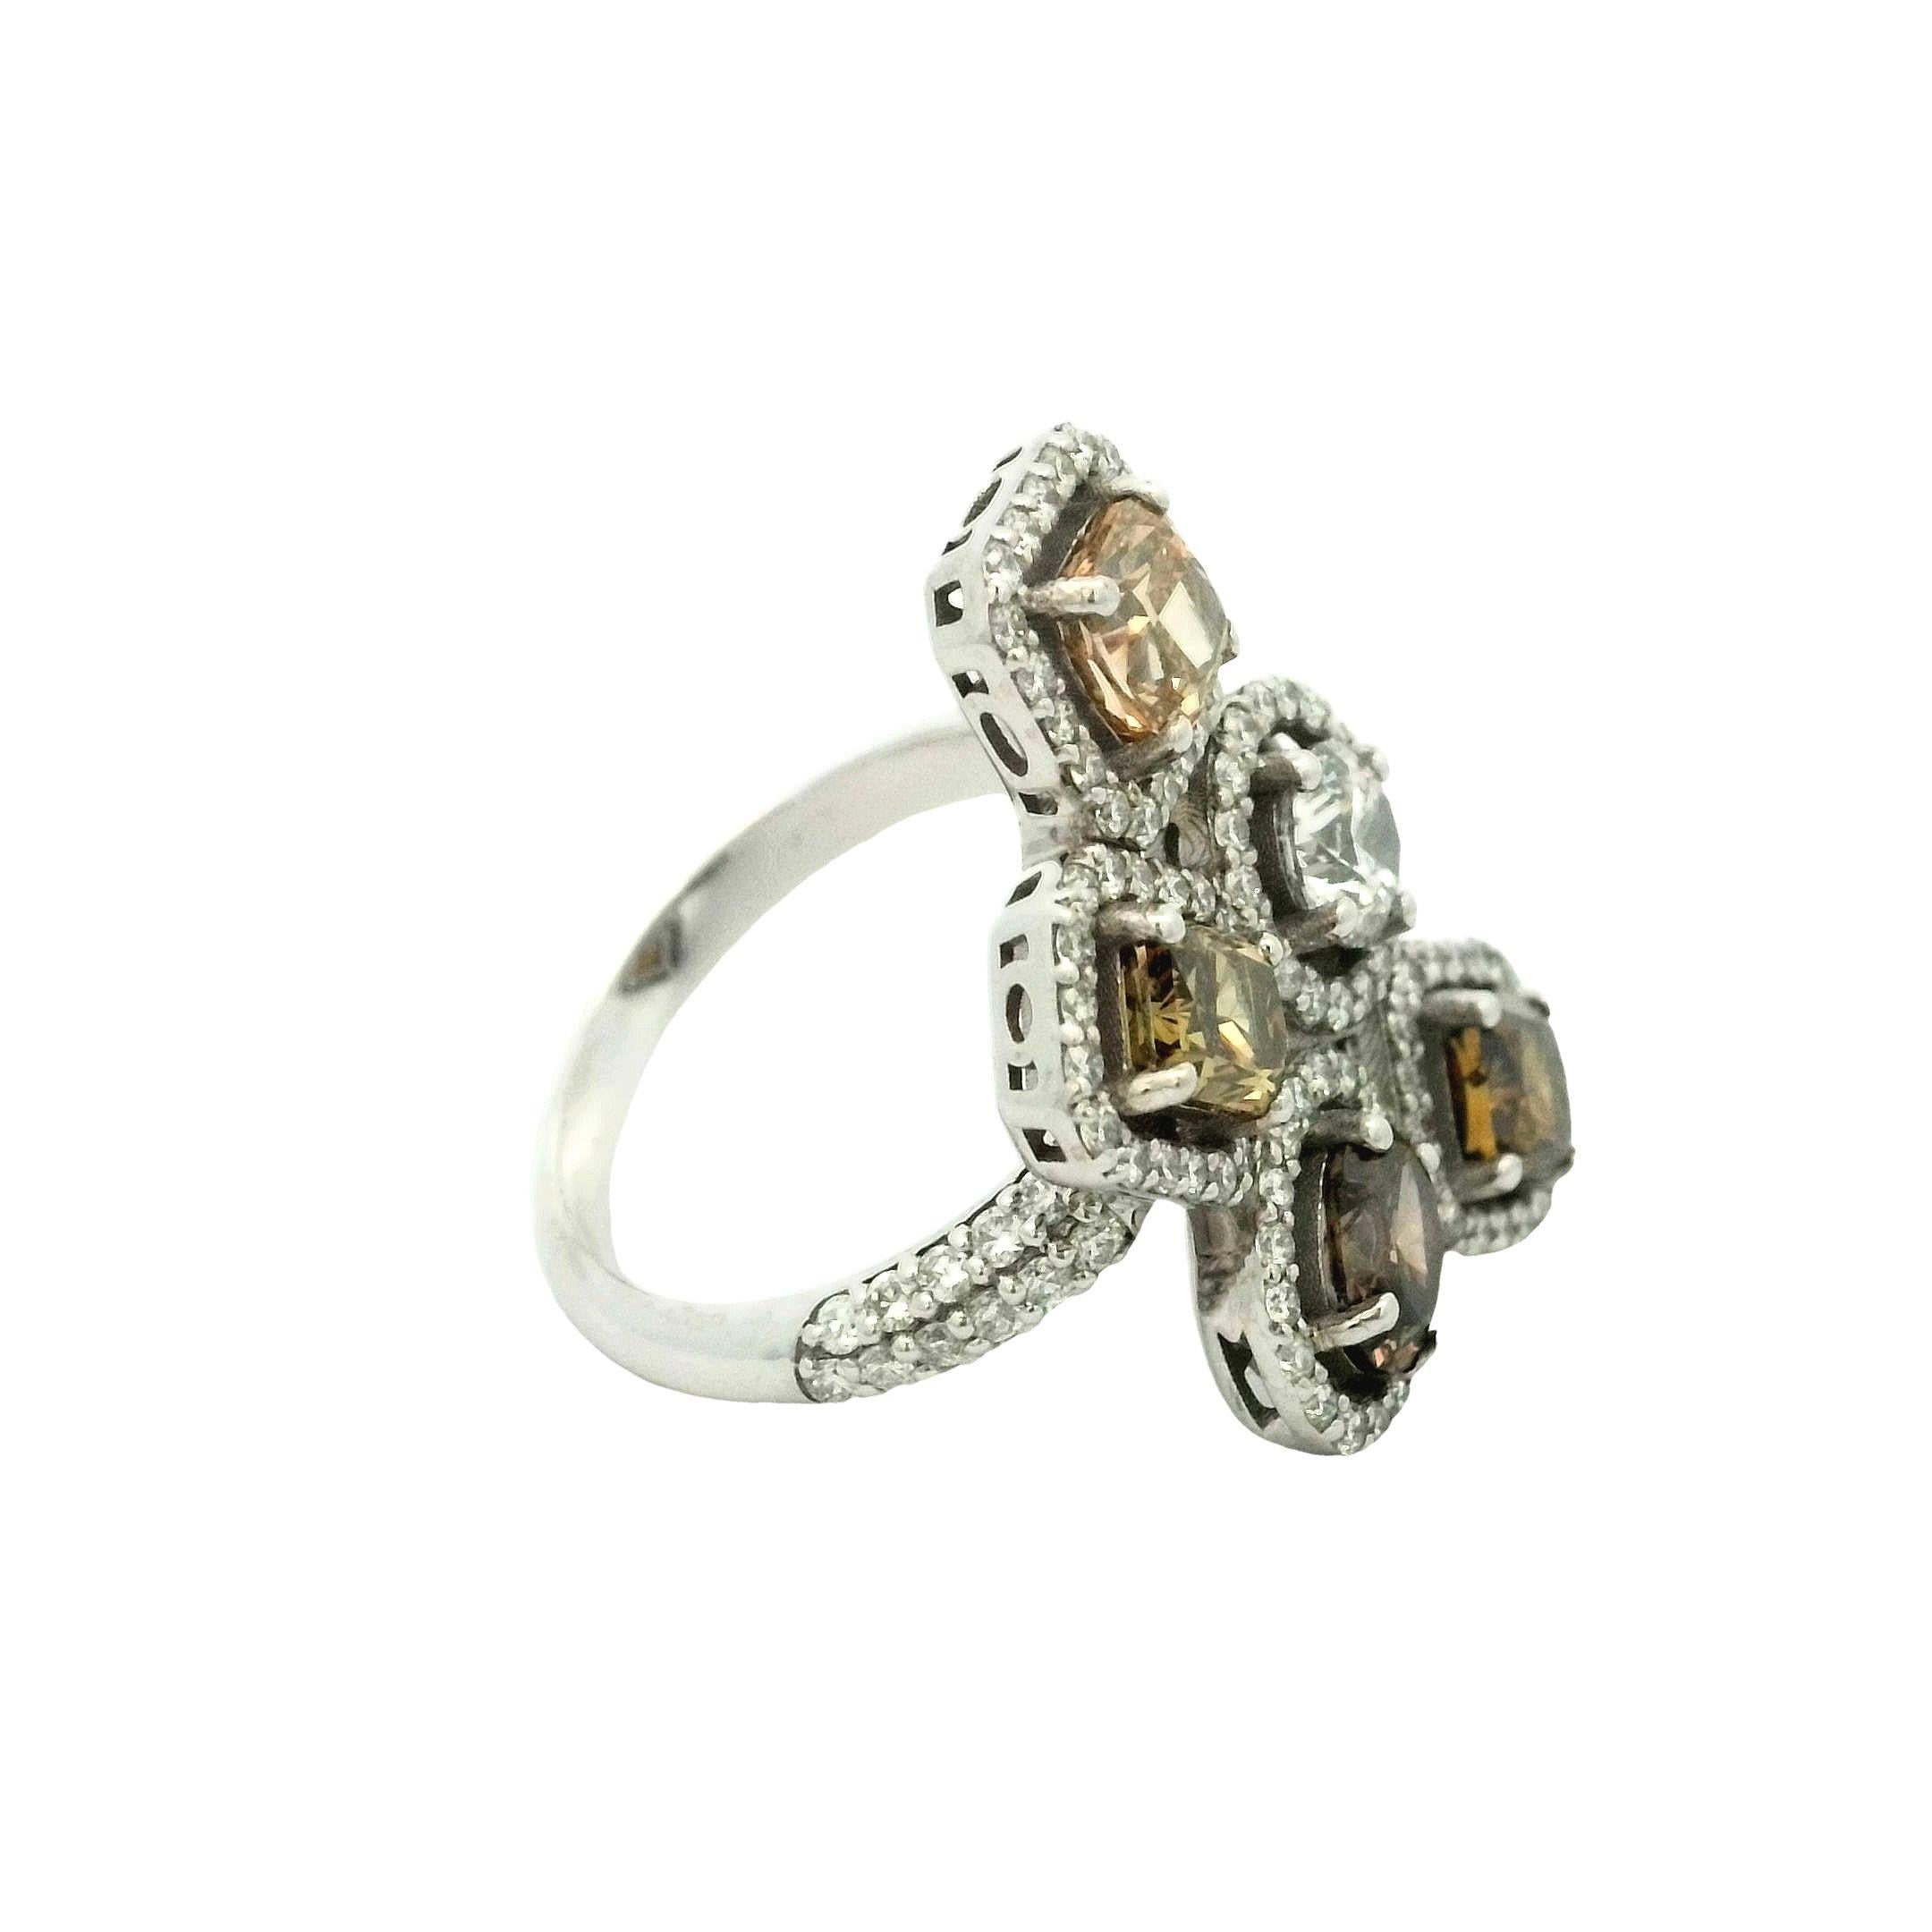 Indulge in the timeless allure of luxury with our exquisite Diamond Encrusted Ring. This exceptional piece artfully fuses unparalleled craftsmanship and painstaking attention to detail, resulting in a standout accessory that promises an endless